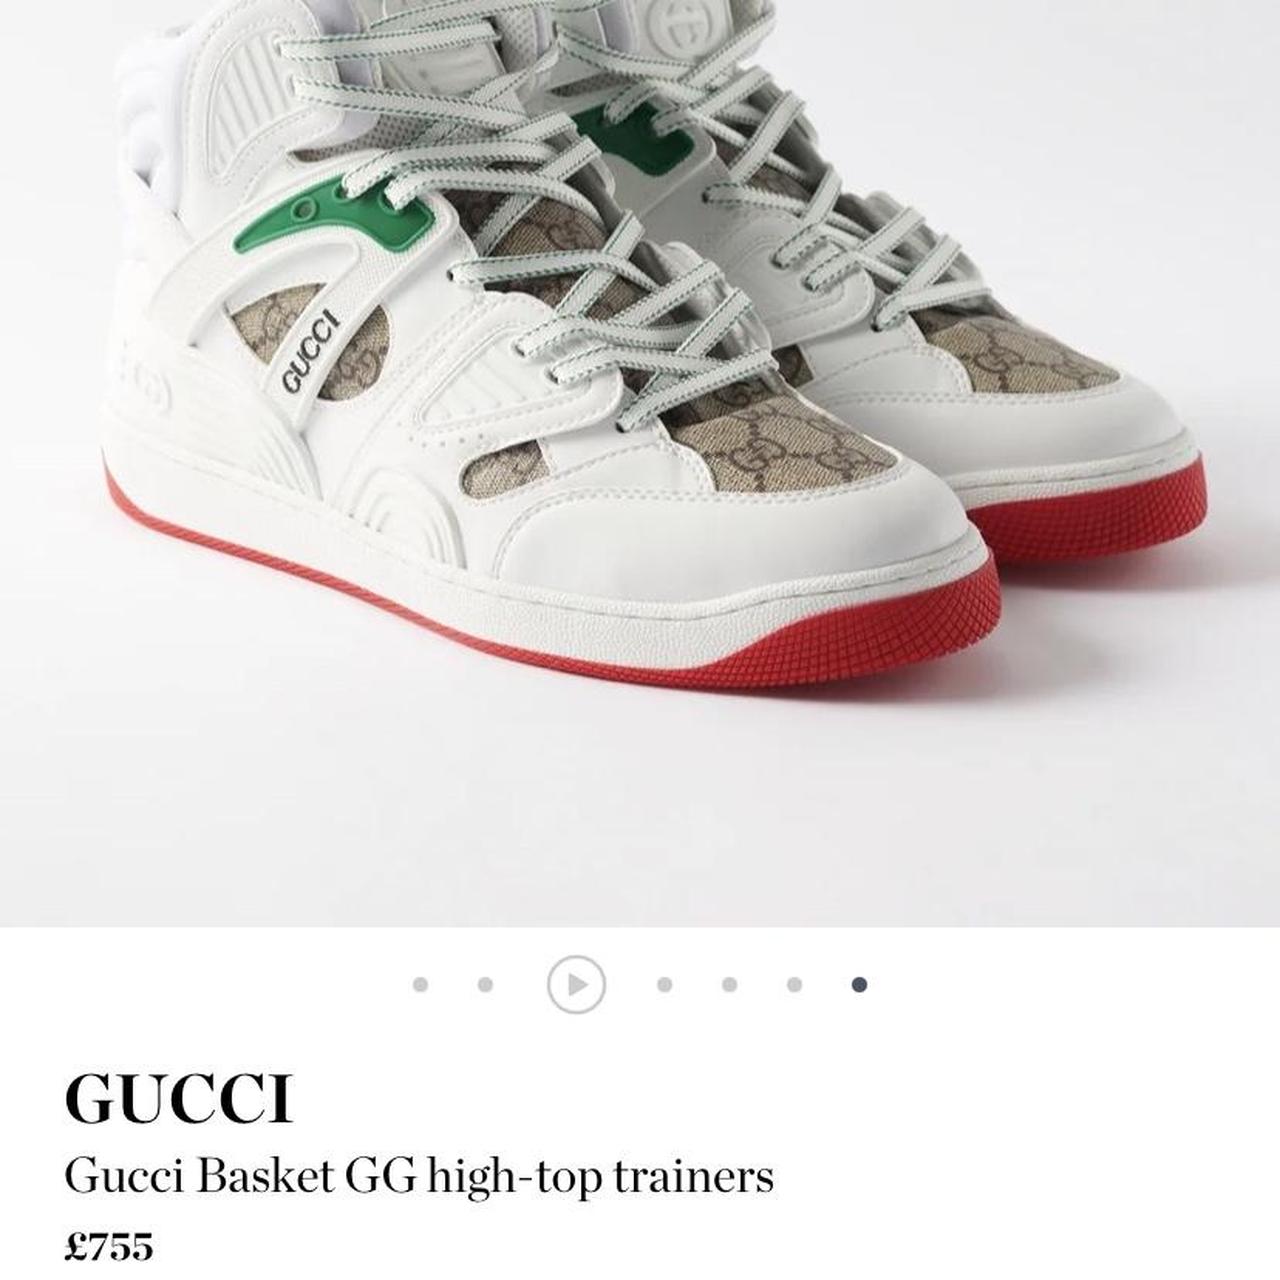 Gucci Basket High-Top Sneakers - White